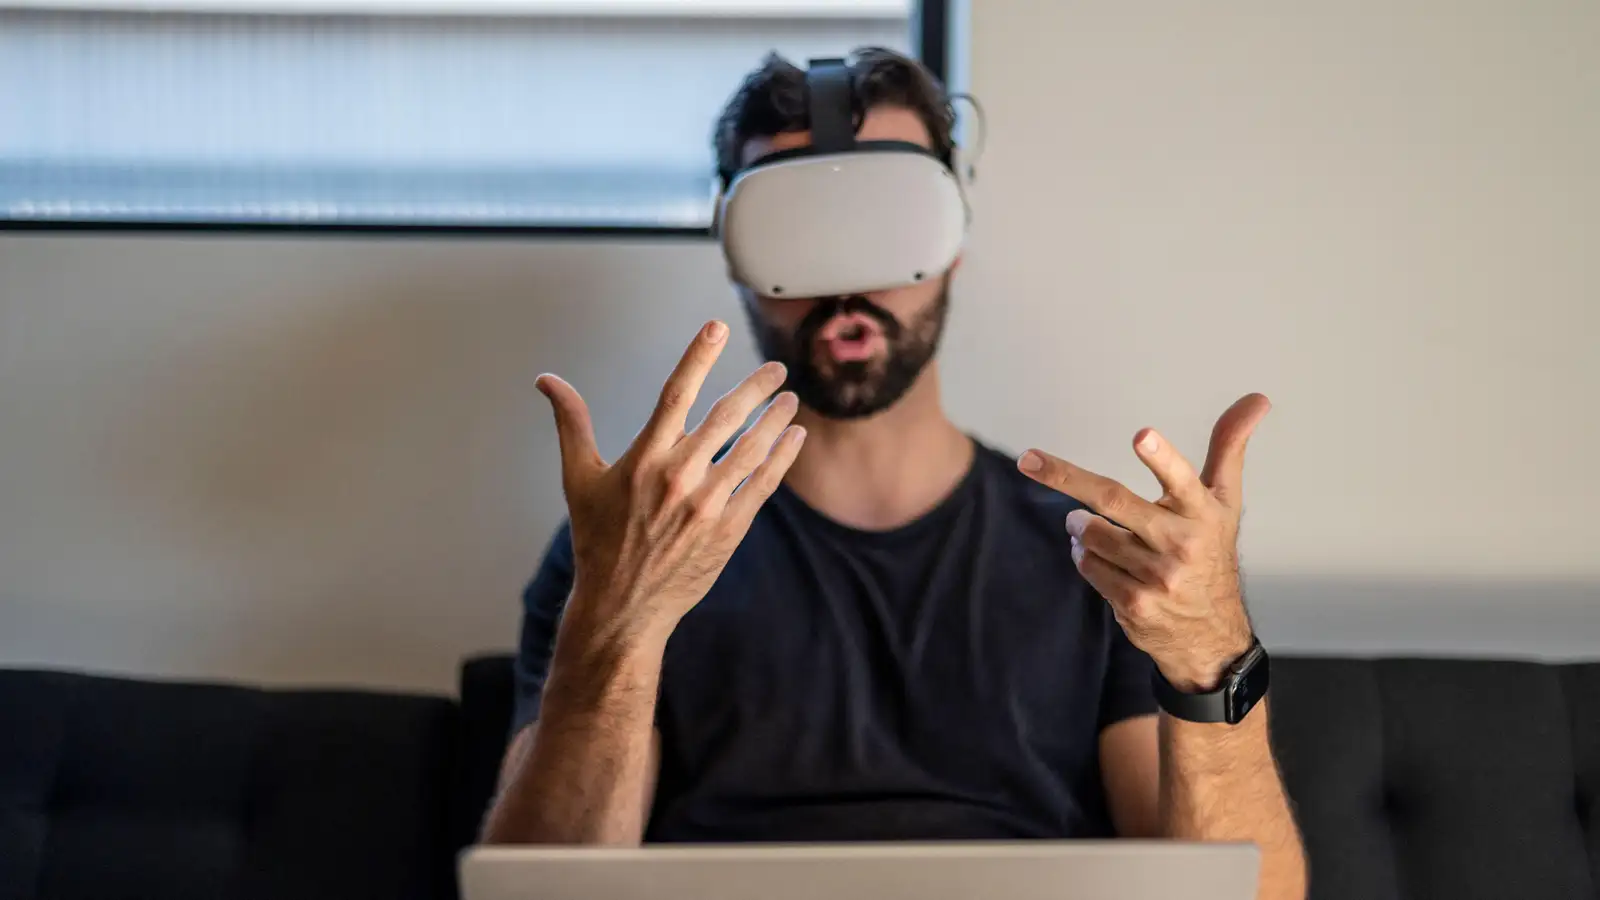 New Hack Alert: How Your VR Headset Could Trap You in a Fake World